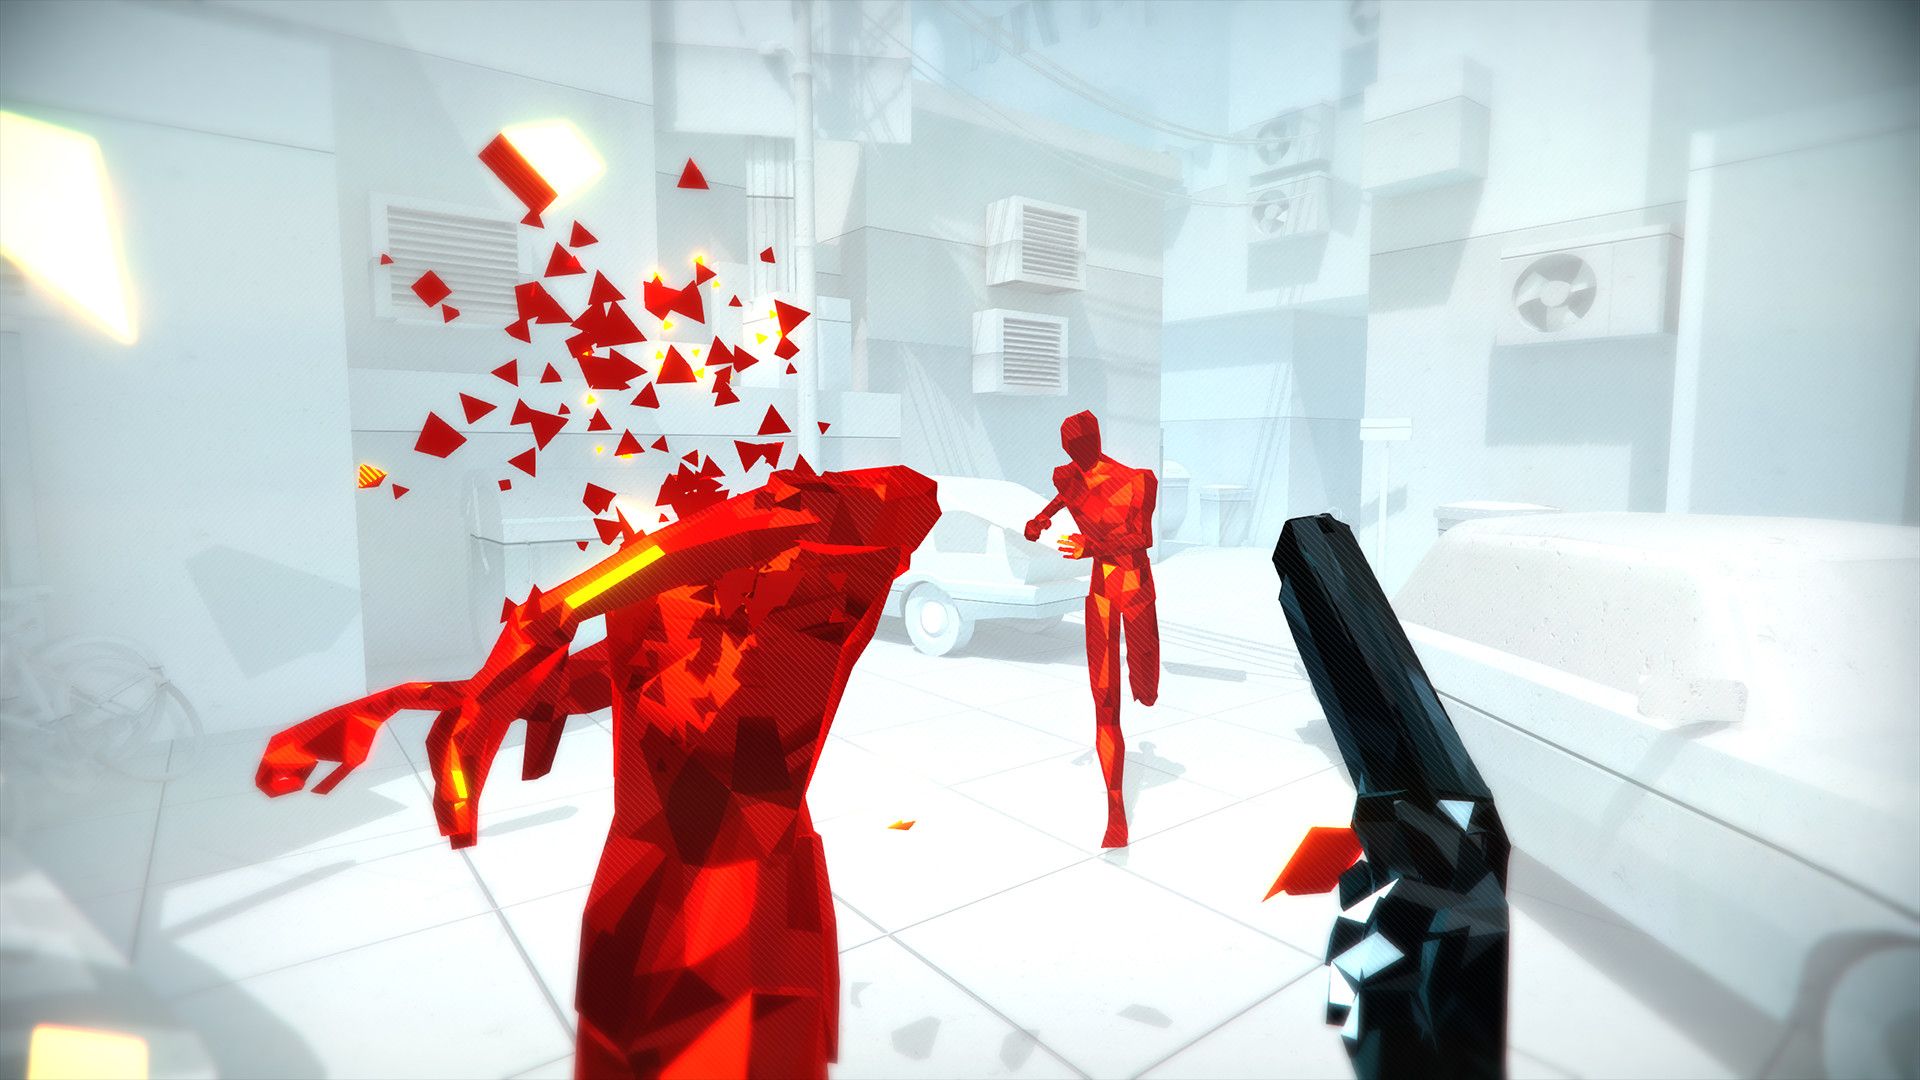 Best Xbox FPS games: A lone soldier shoots two red enemies in Superhot